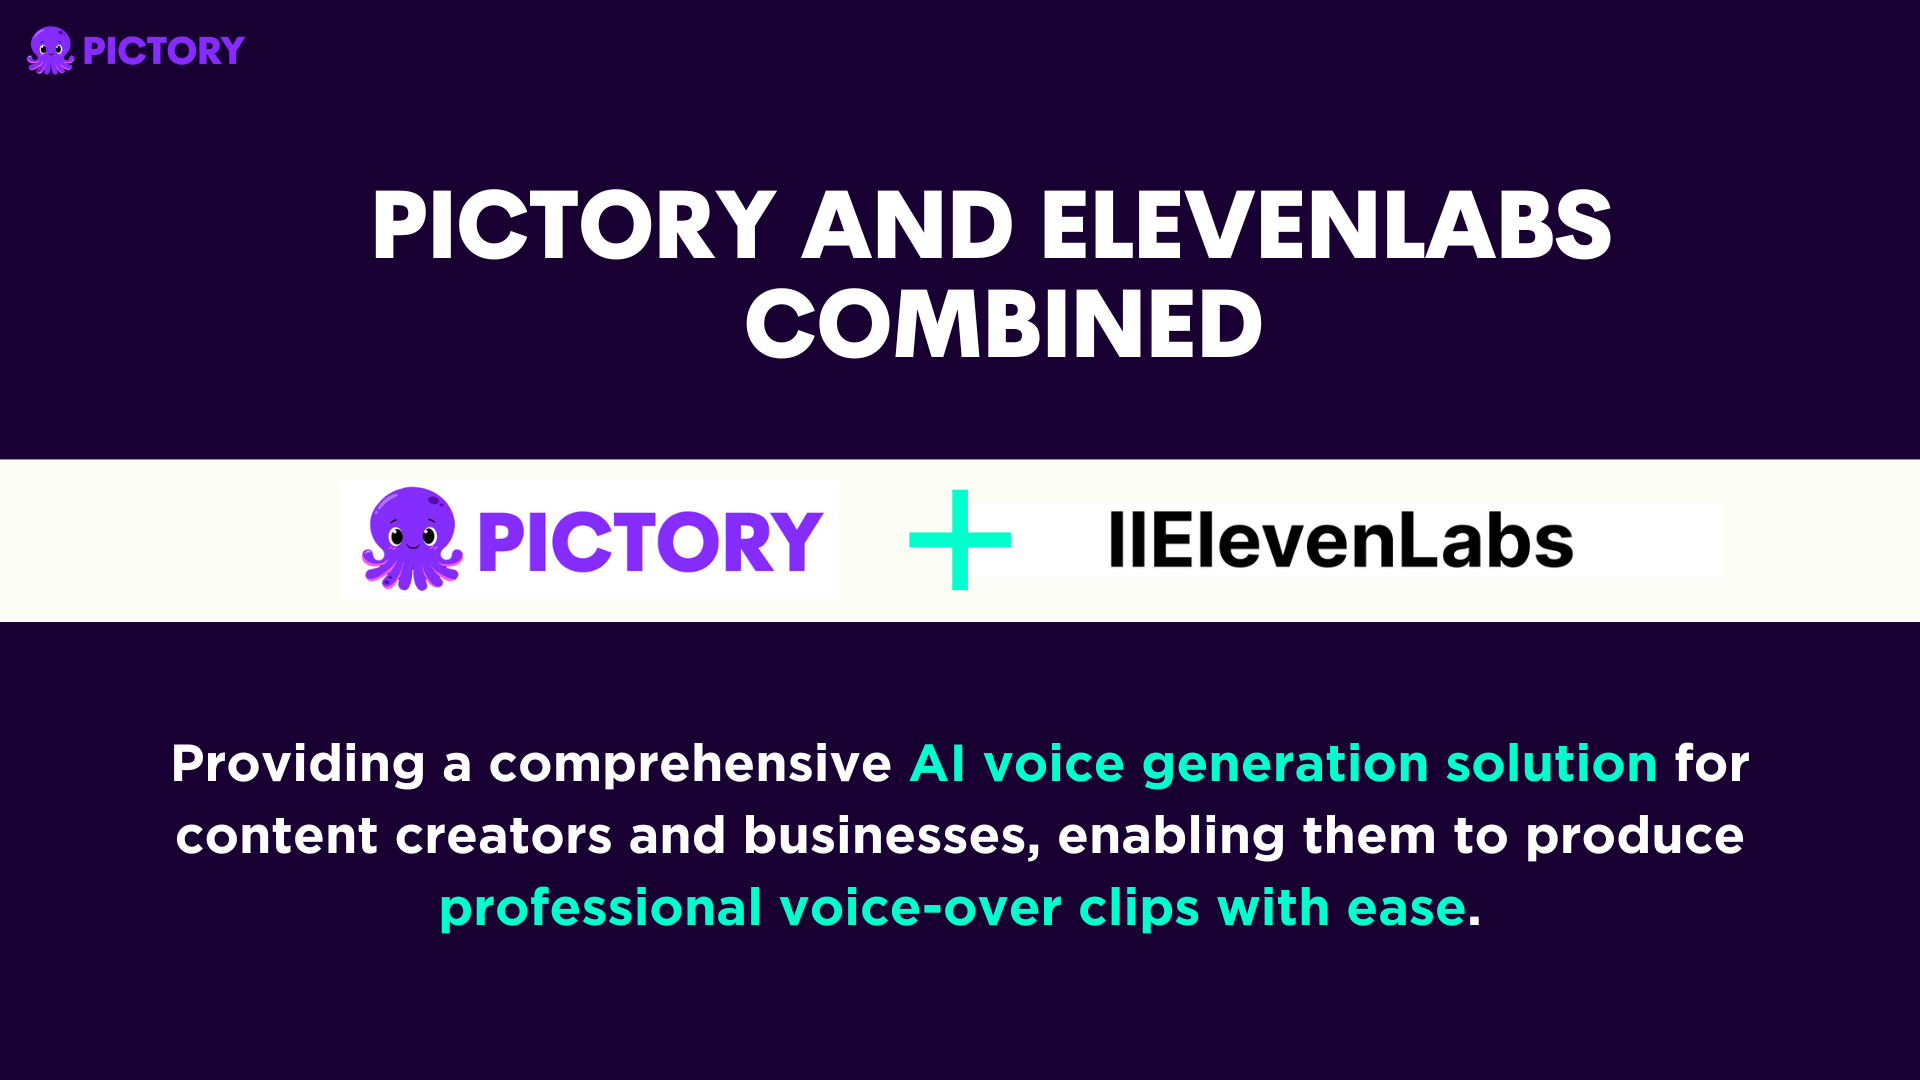 Pictory and ElevenLabs provide a comprehensive AI voice generation solution for content creators and businesses, enabling them to produce professional voice-over clips with ease.